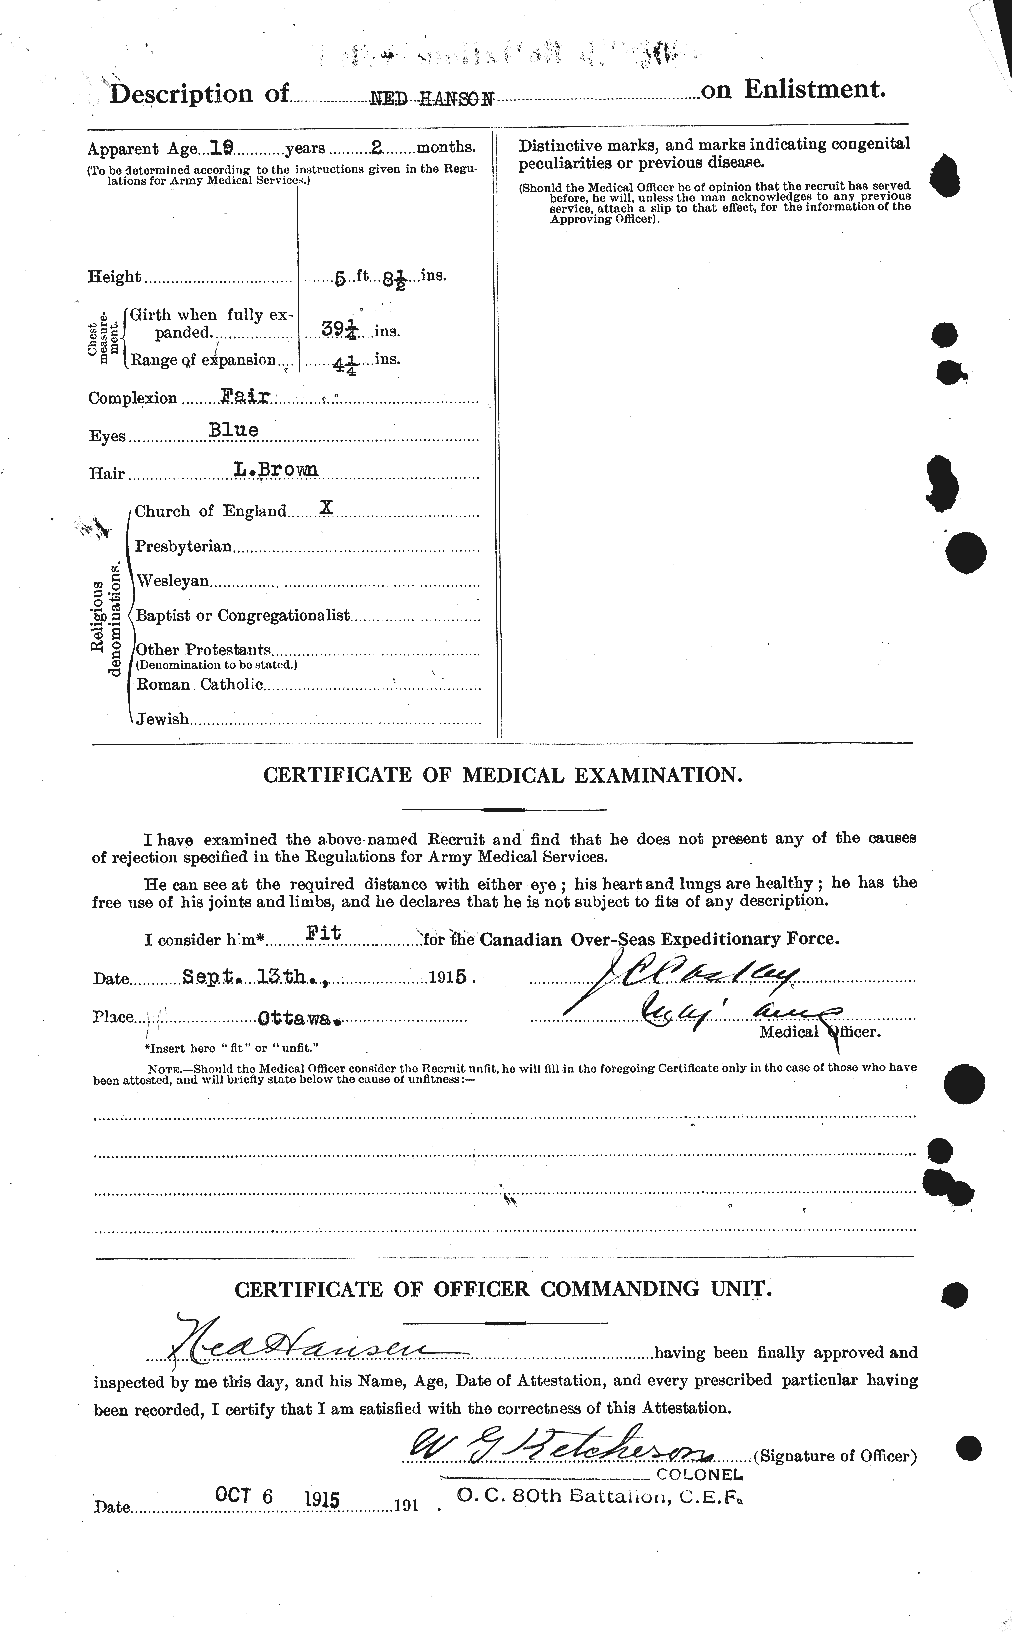 Personnel Records of the First World War - CEF 375982b